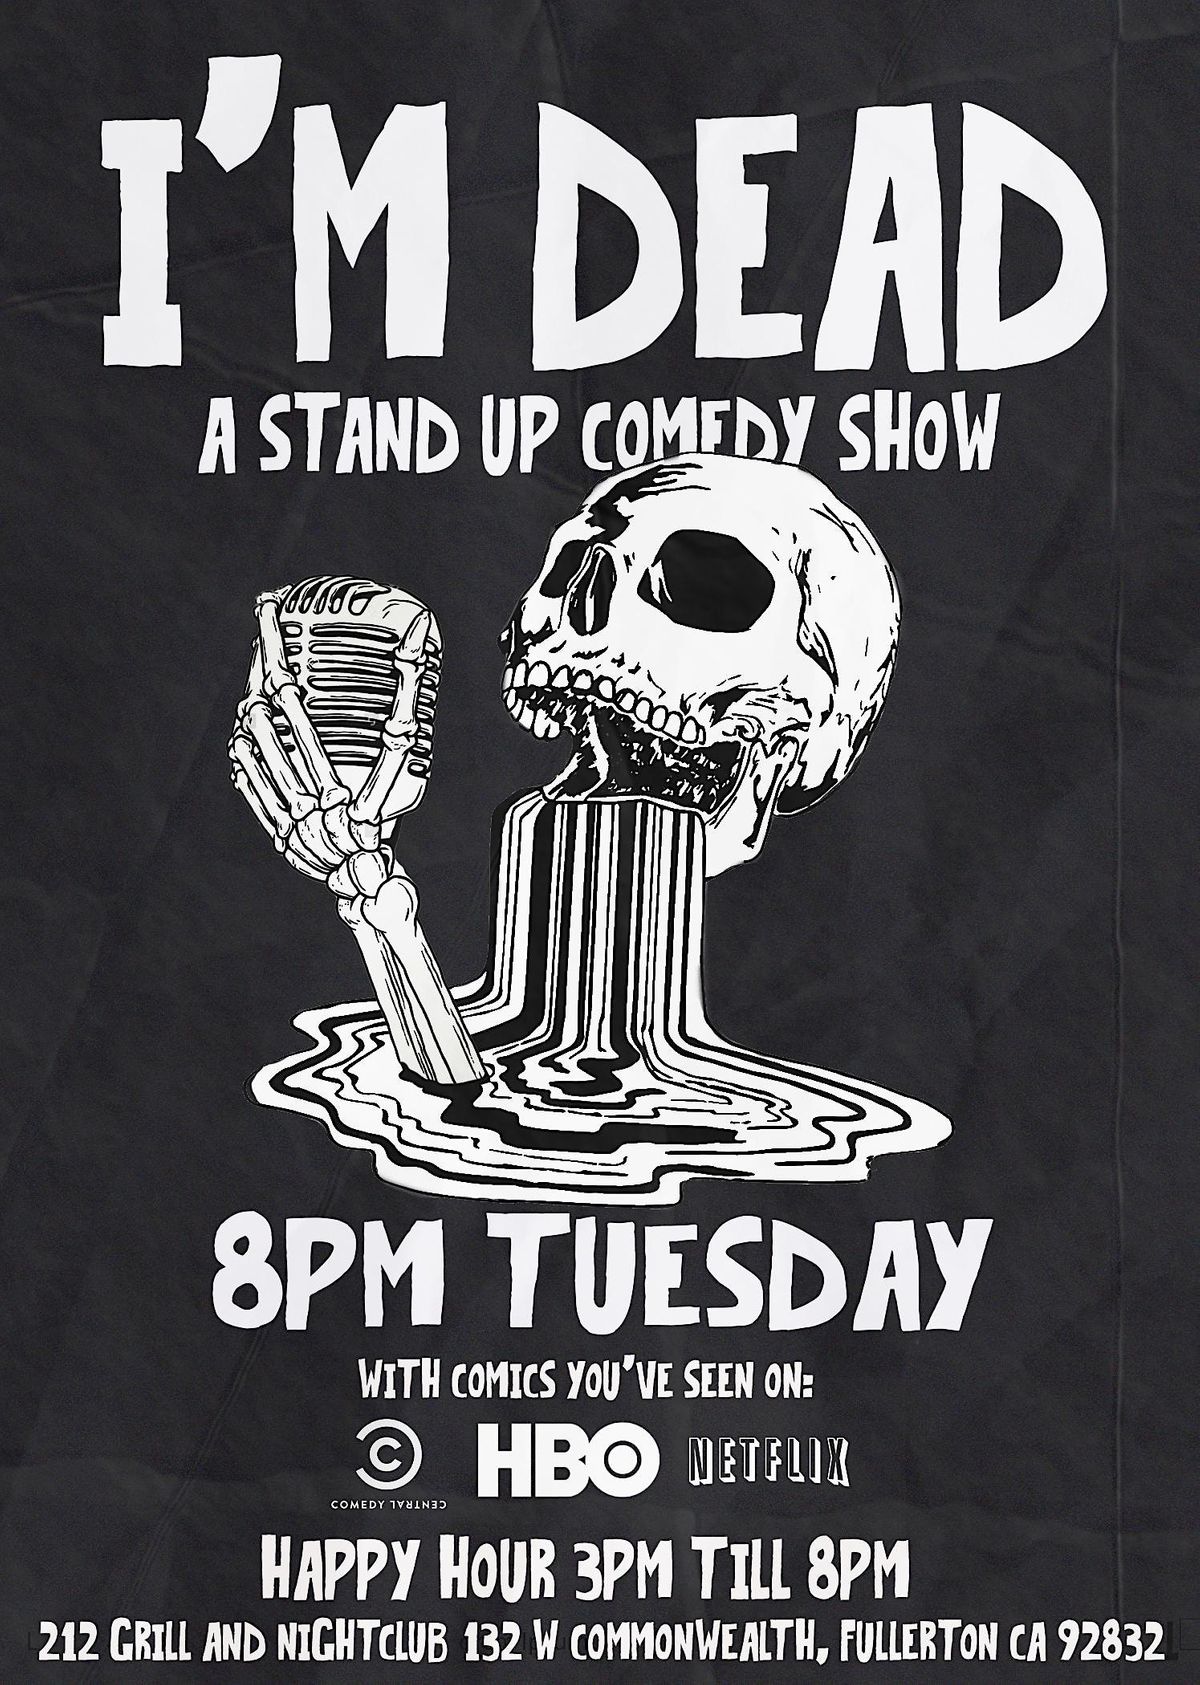 "I'm Dead" Stand Up Comedy Show @ 212 Grill and Nightclub